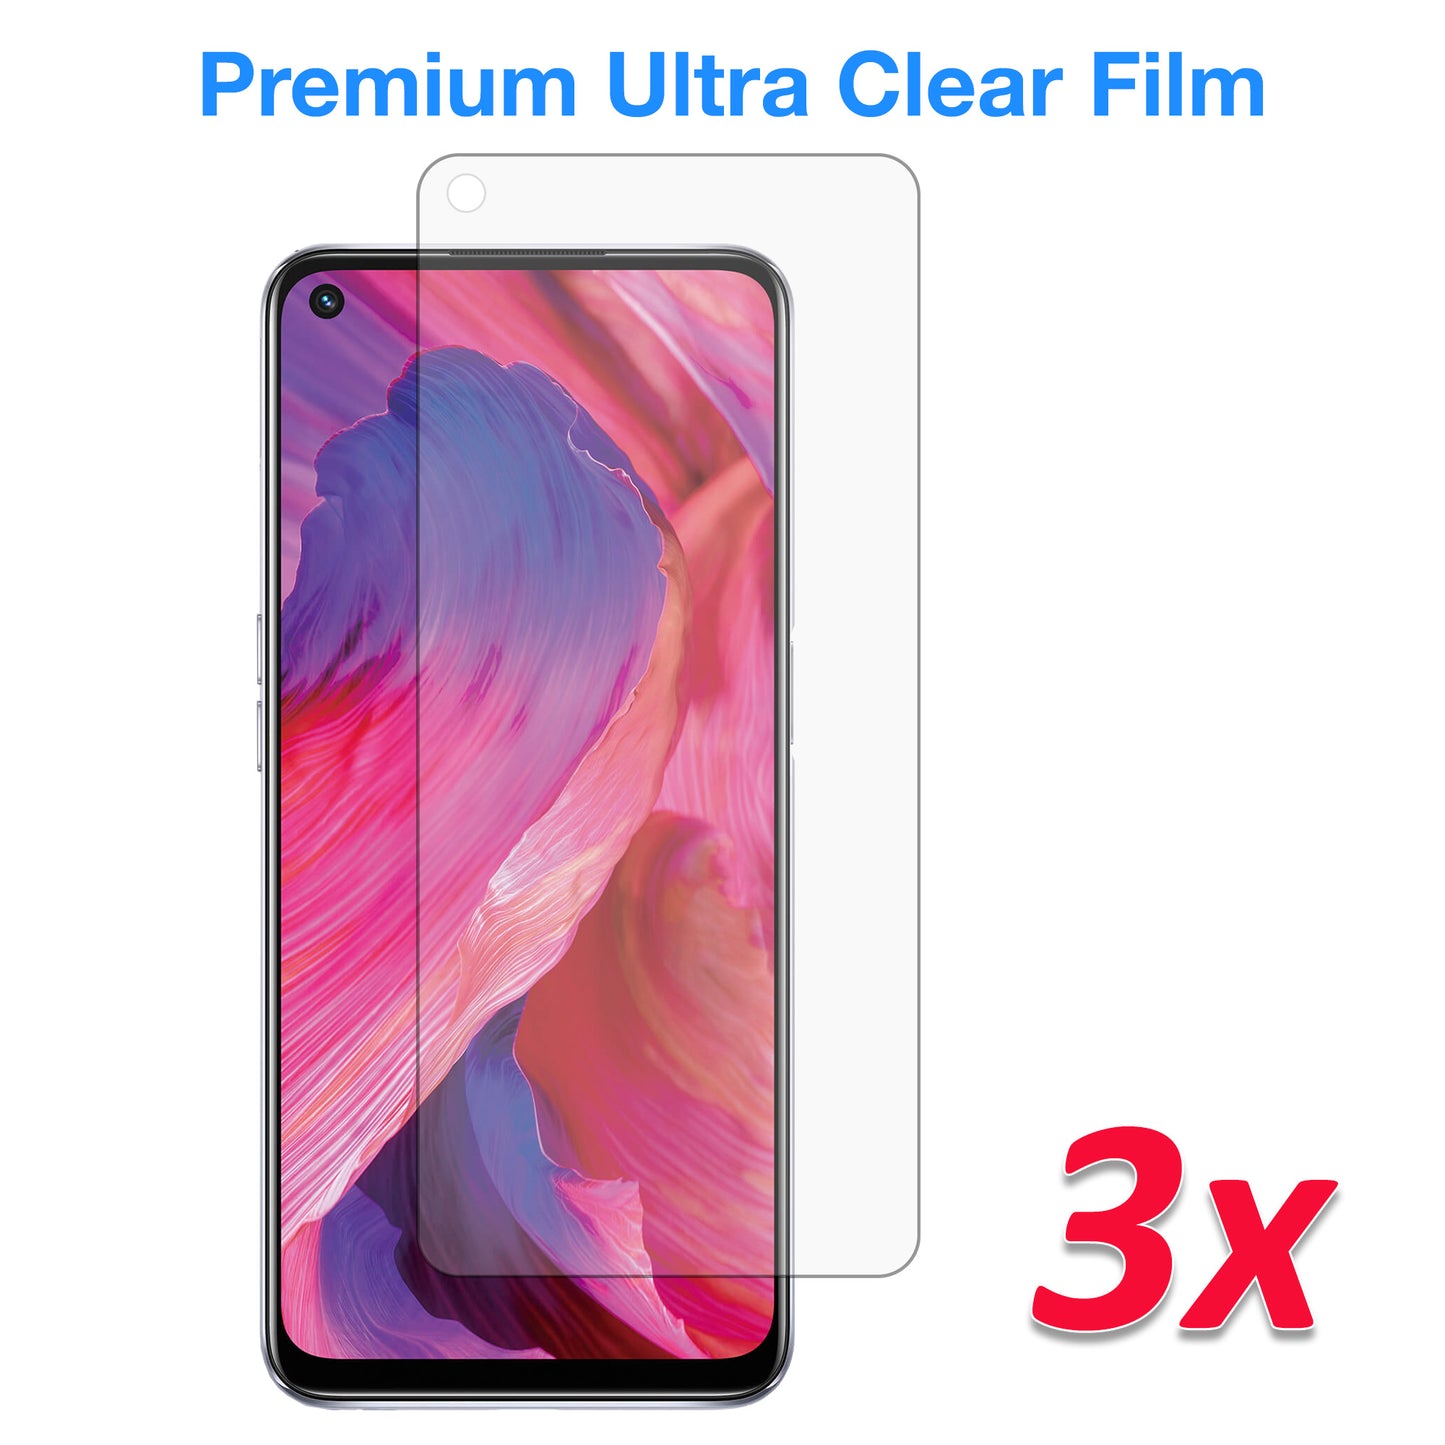 [3 Pack] MEZON OPPO A74 Ultra Clear Screen Protector Case Friendly Film (OPPO A74, Clear)